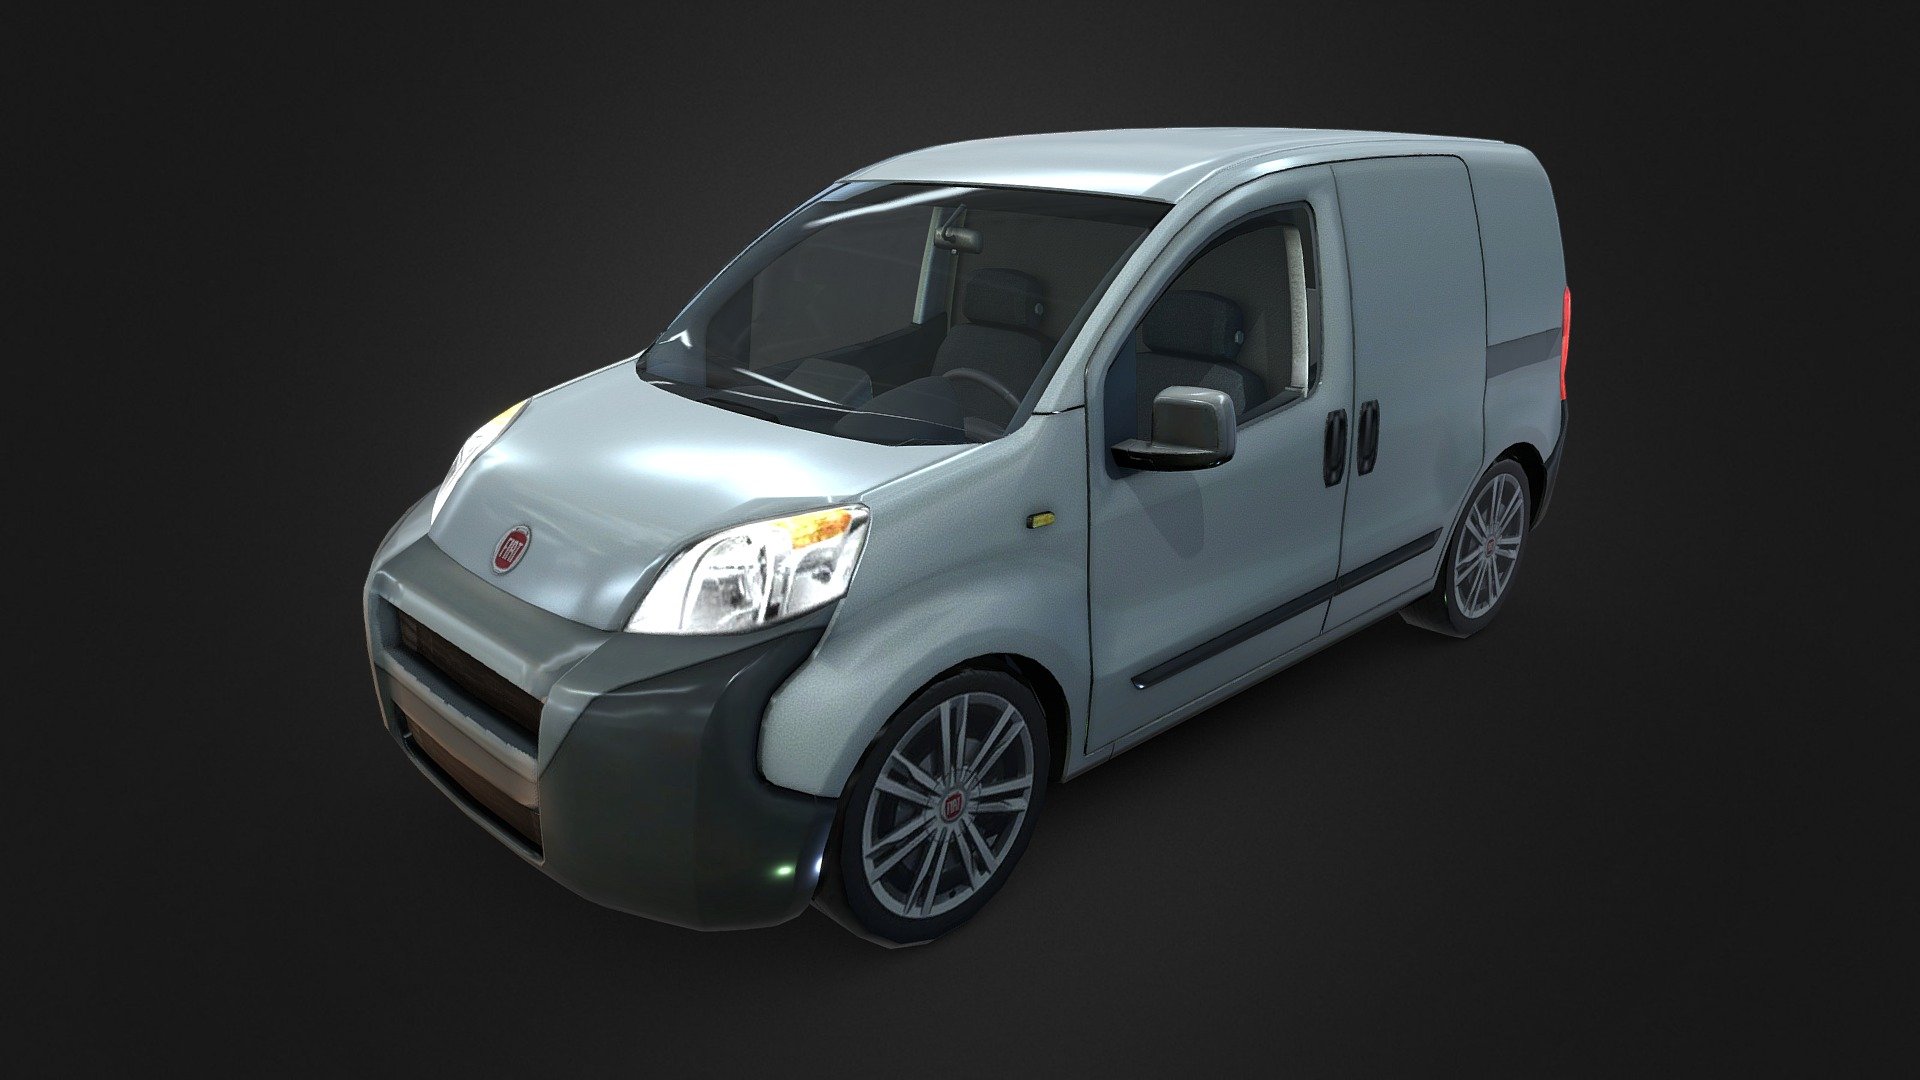 Fiat Fiorino Vehicle (Model Low Poly) Textures Diffuse Textures Normal Textures Iluminated

Files Extension .PNG .JPG .MAX (2020) .FBX

Create by Aaron3D: aarontresdesero@gmail.com - Fiat Fiorino Commercial Van + Interior - Buy Royalty Free 3D model by Aaron3D (@Aarontresde) 3d model